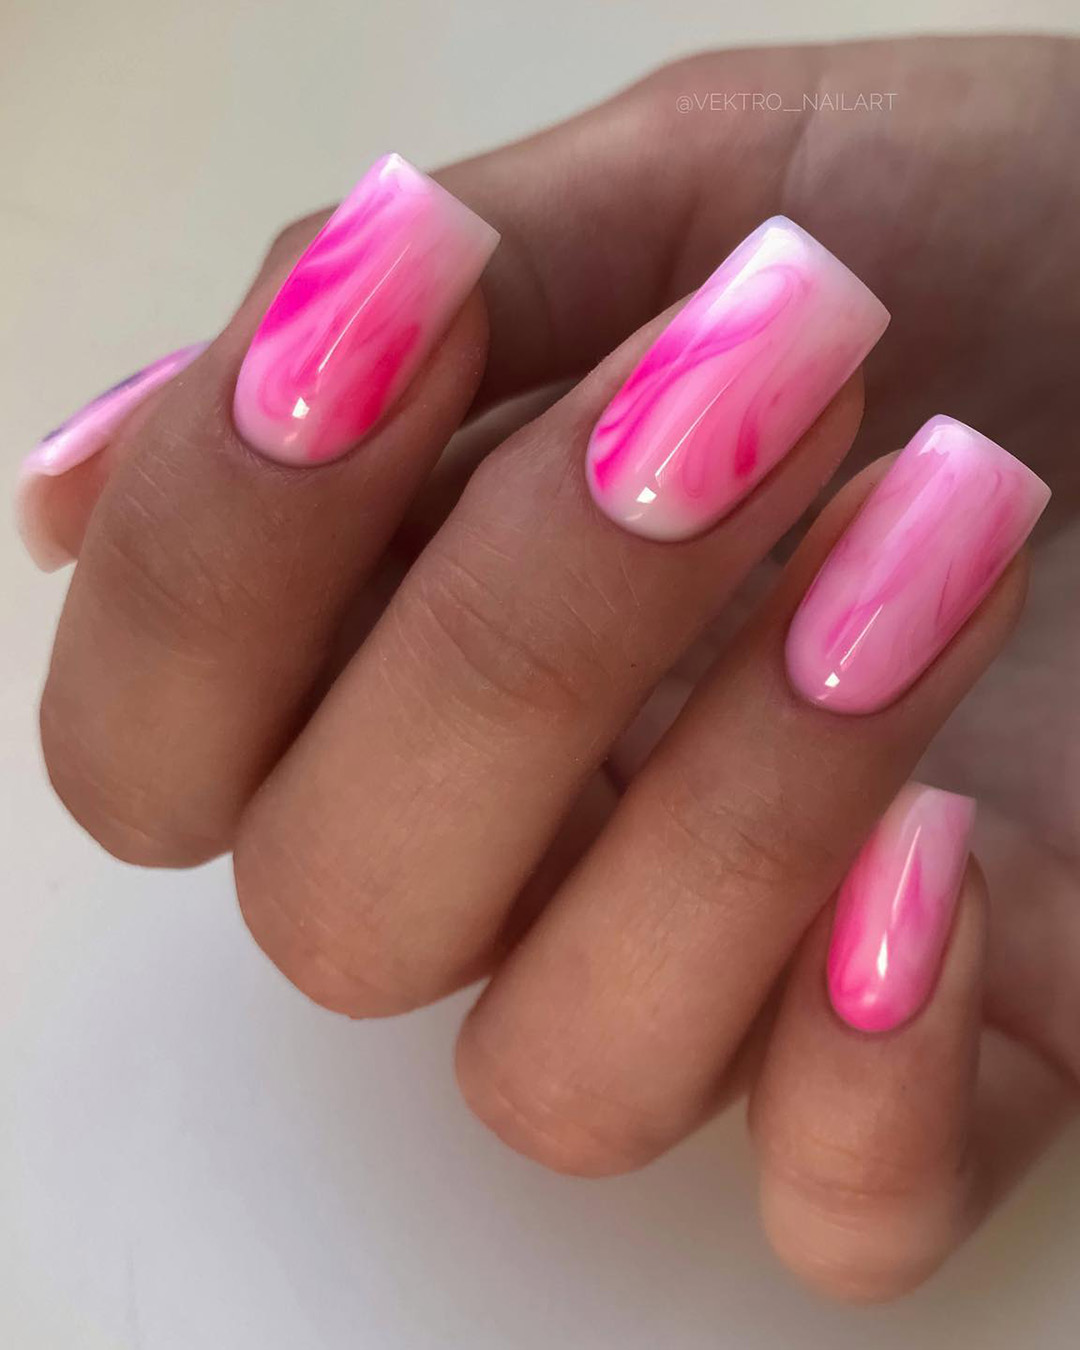 pink and white nails hot abstract in two colors vektro__nailart